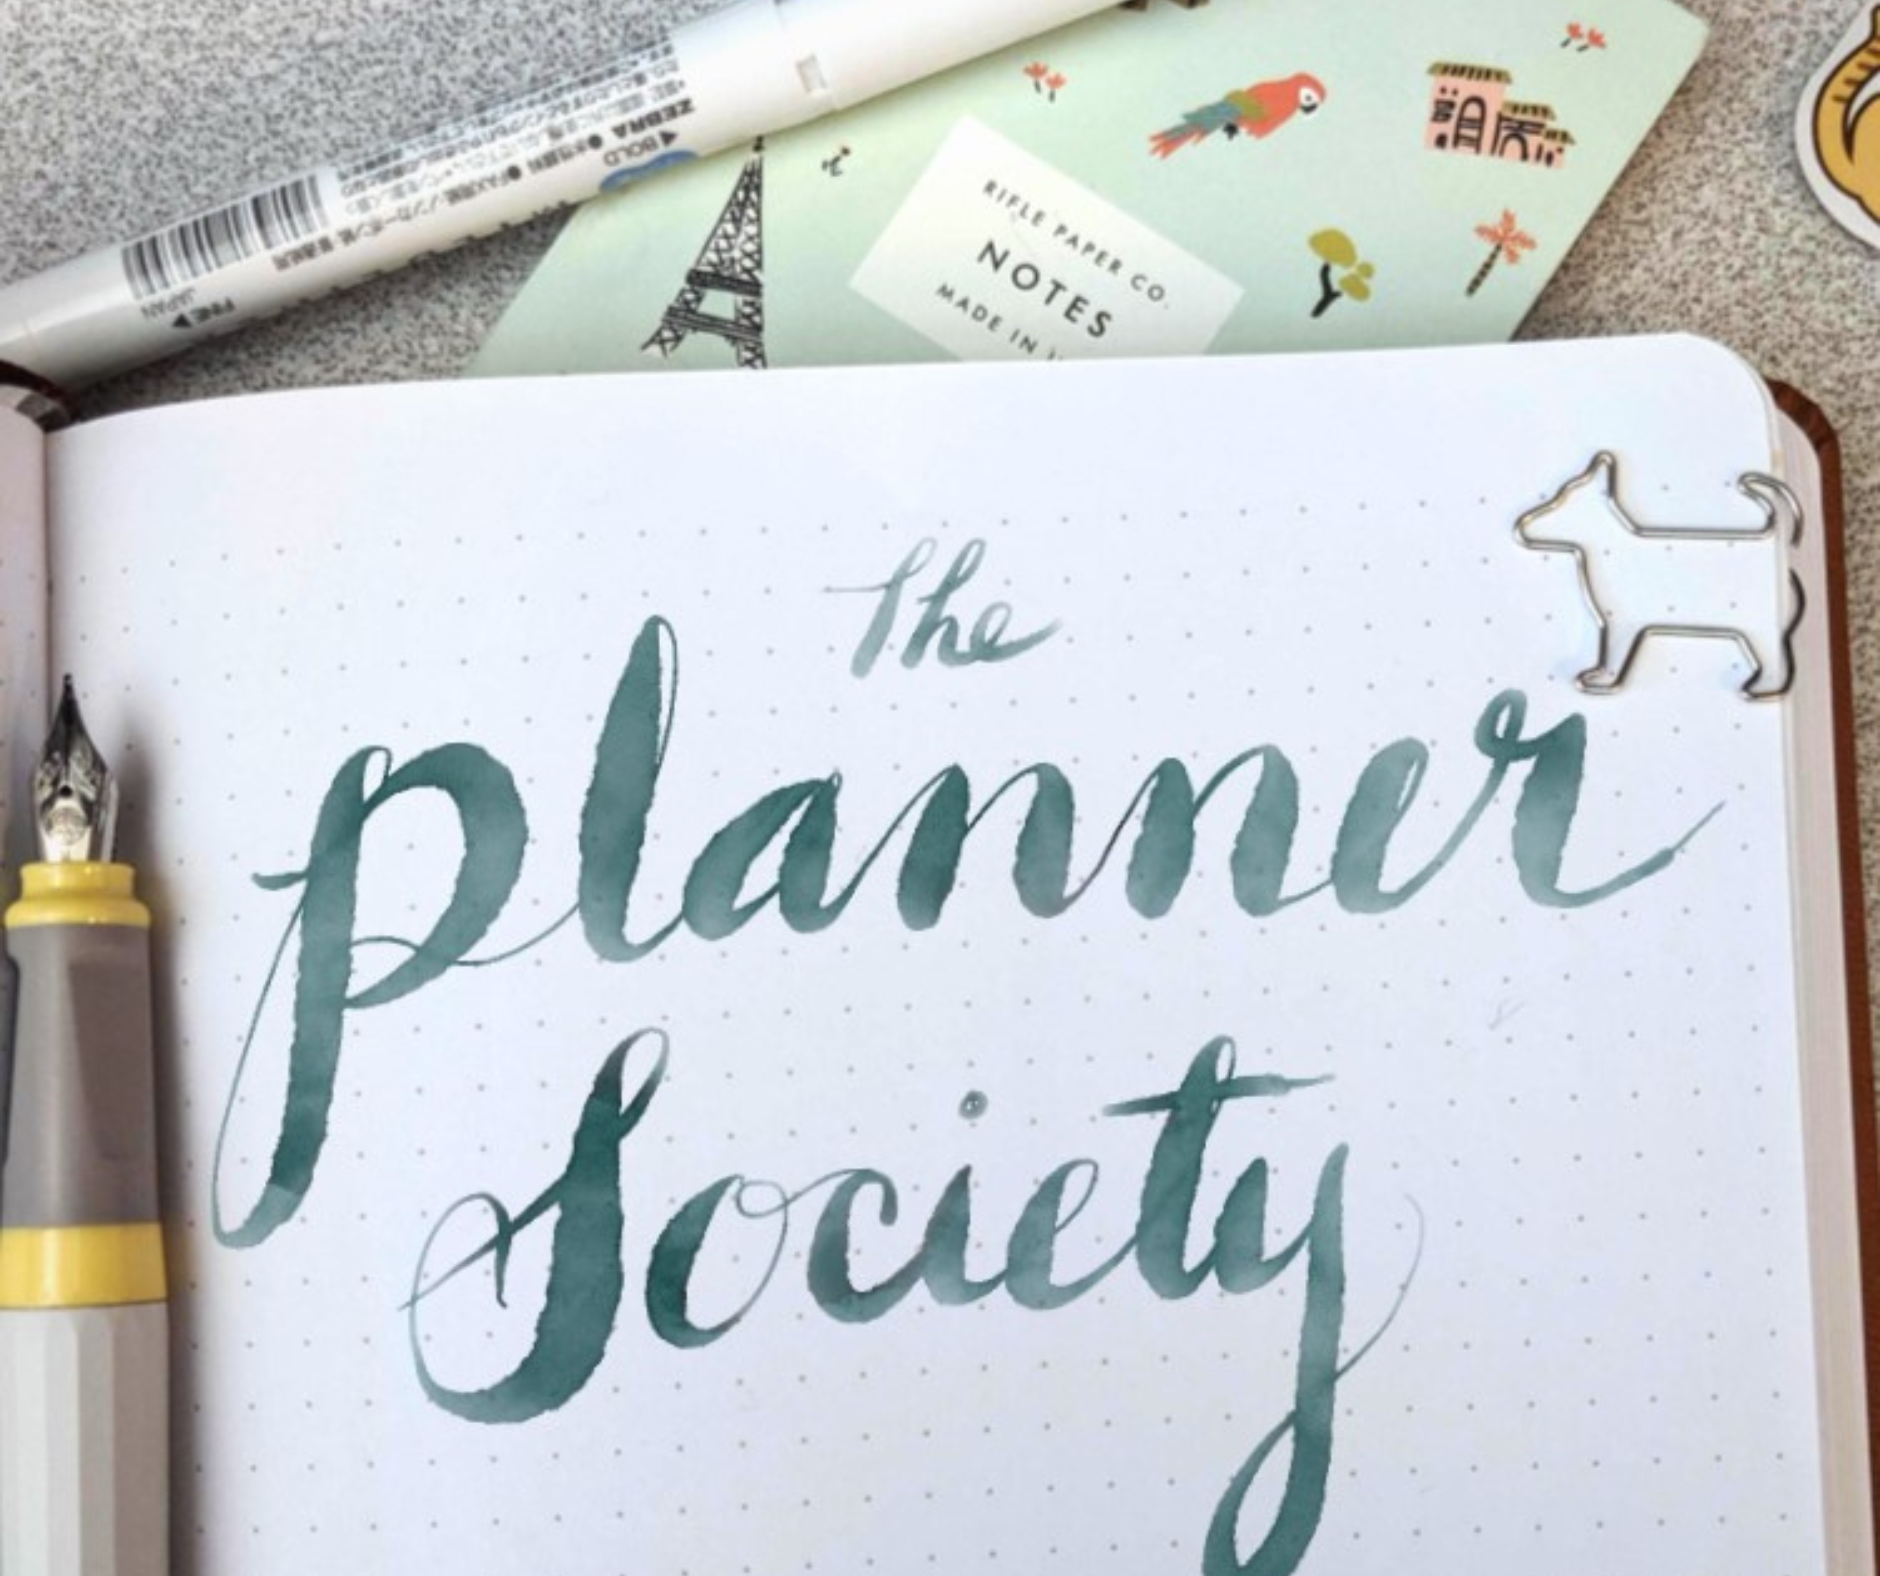 Journal The Planner Society Pen Pencil Postcard